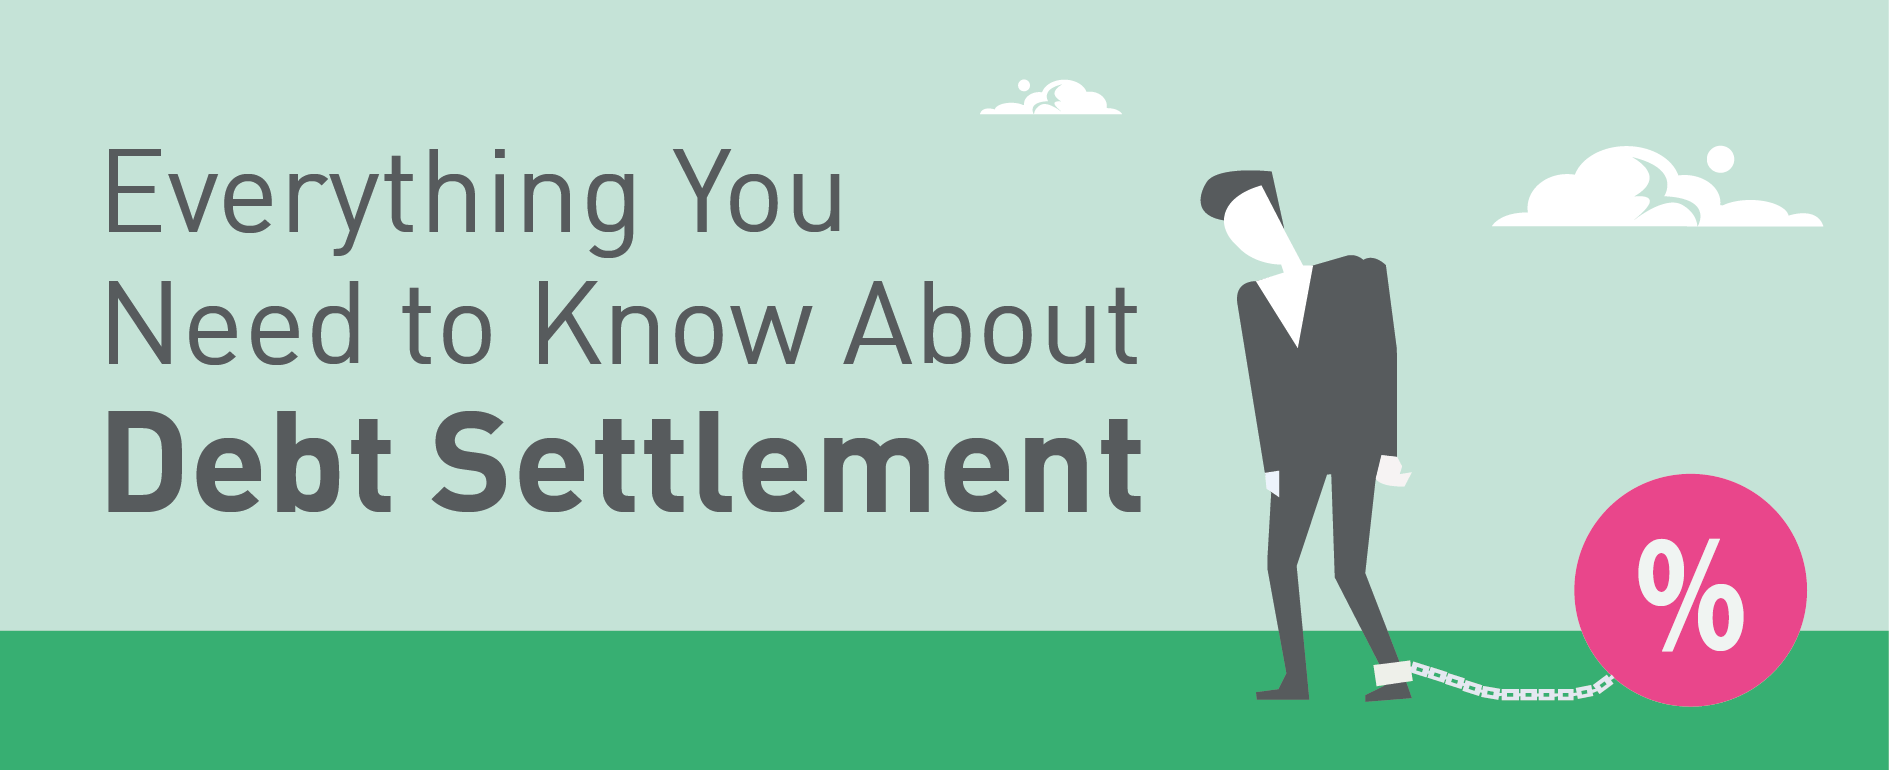 Everything You Need to Know About Debt Settlement